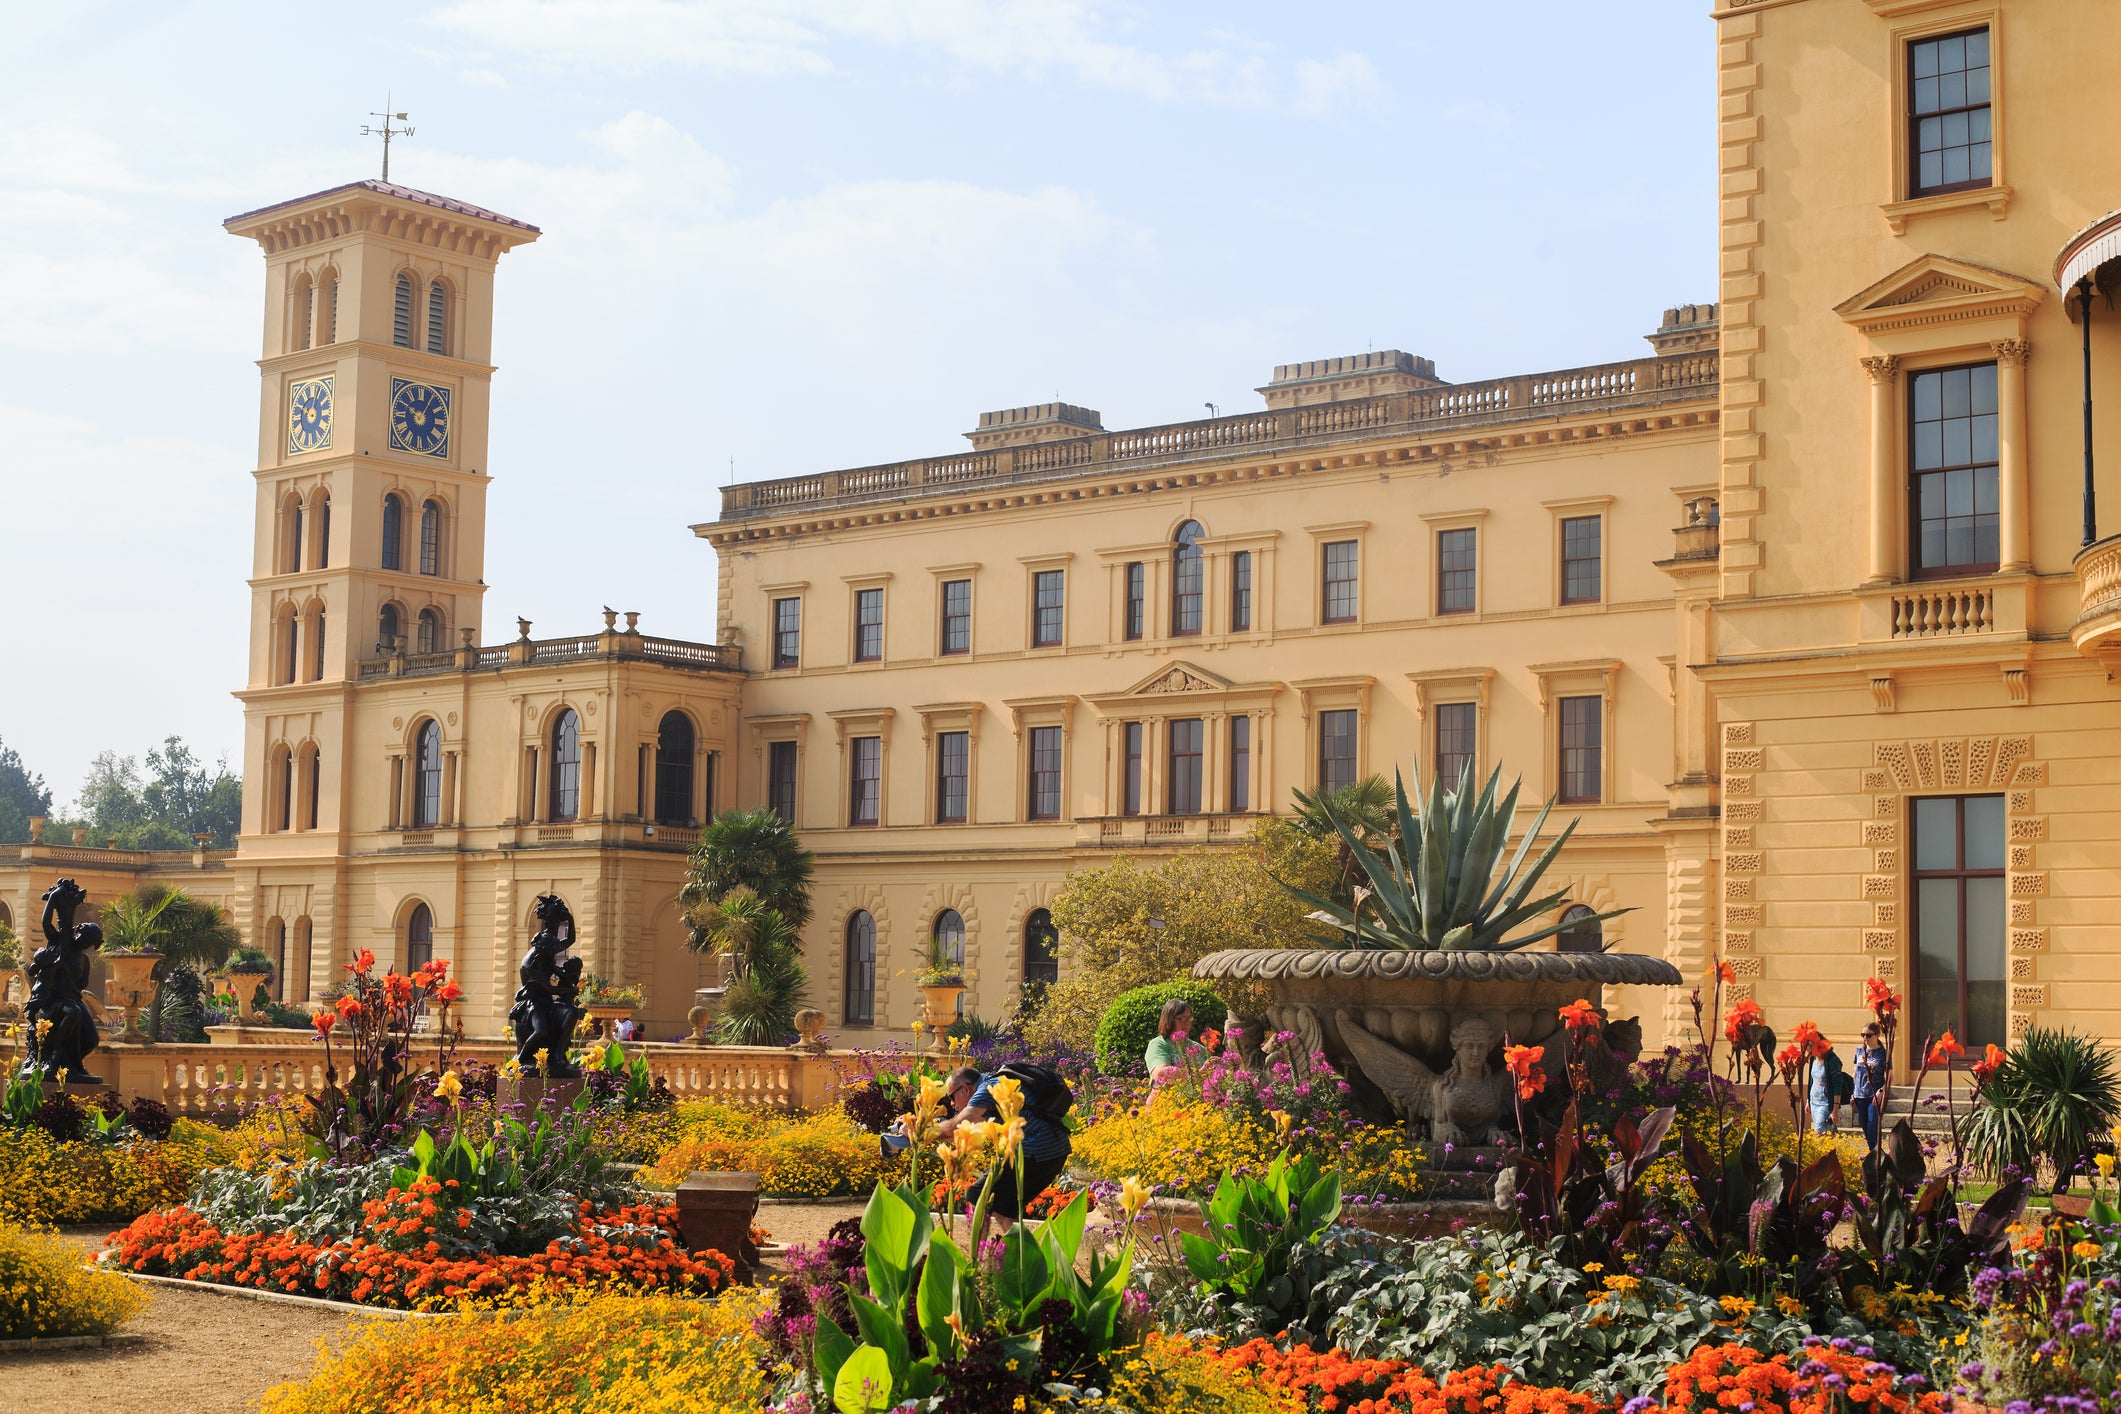 Osborne House, the former residence of Queen Victoria, gives an intimate insight into the royal’s life